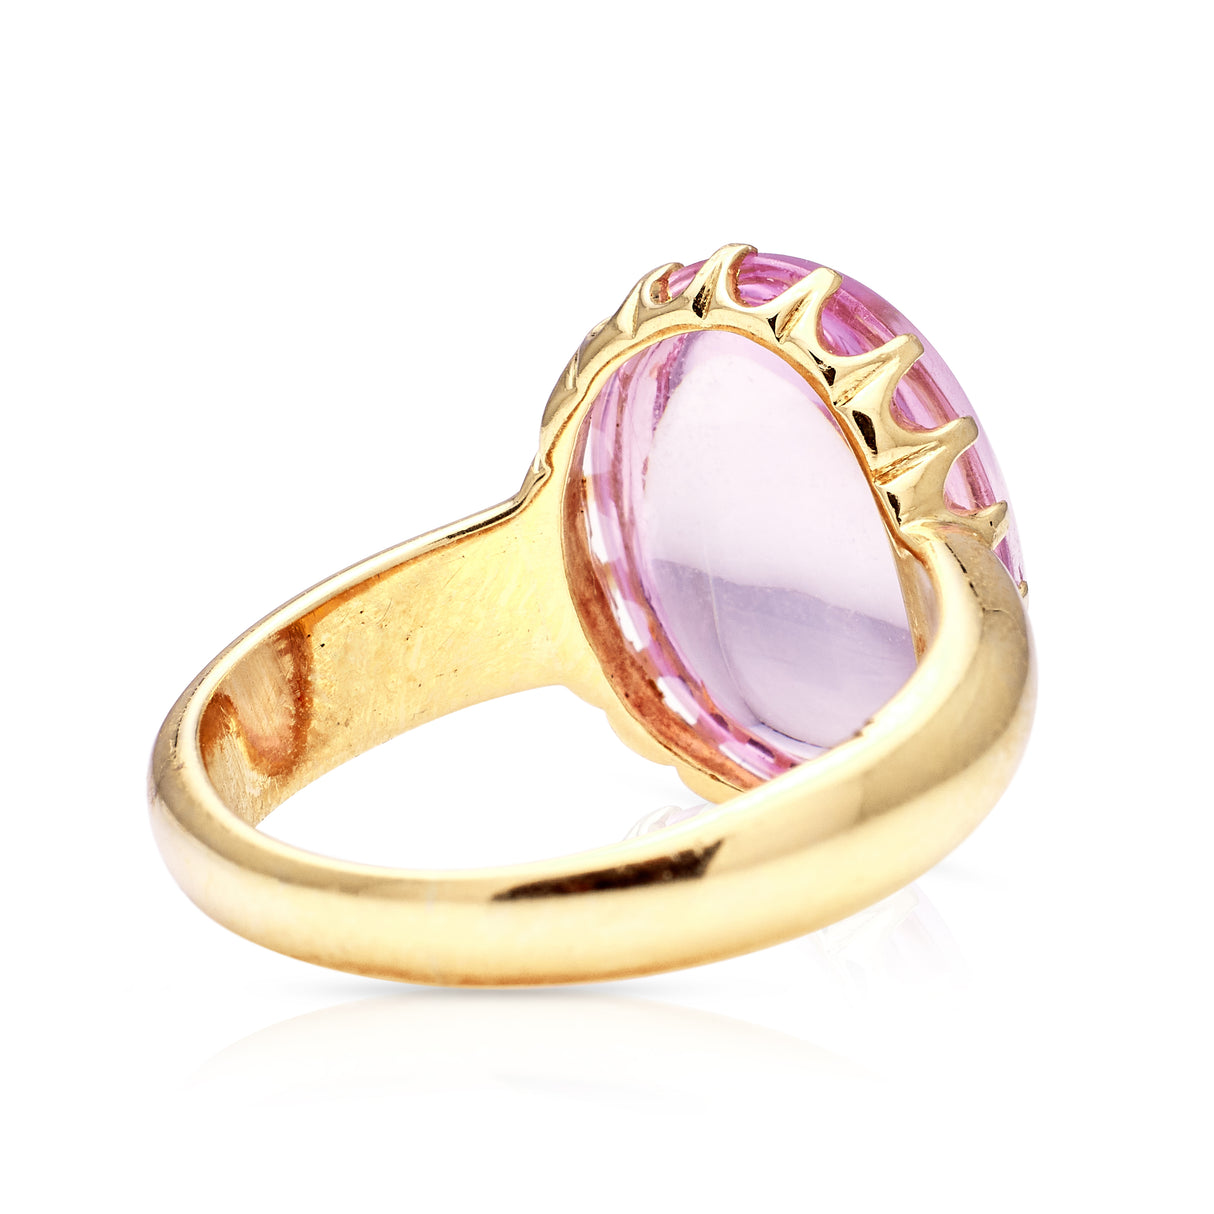 Victorian, cabochon pink topaz ring, 18ct yellow gold